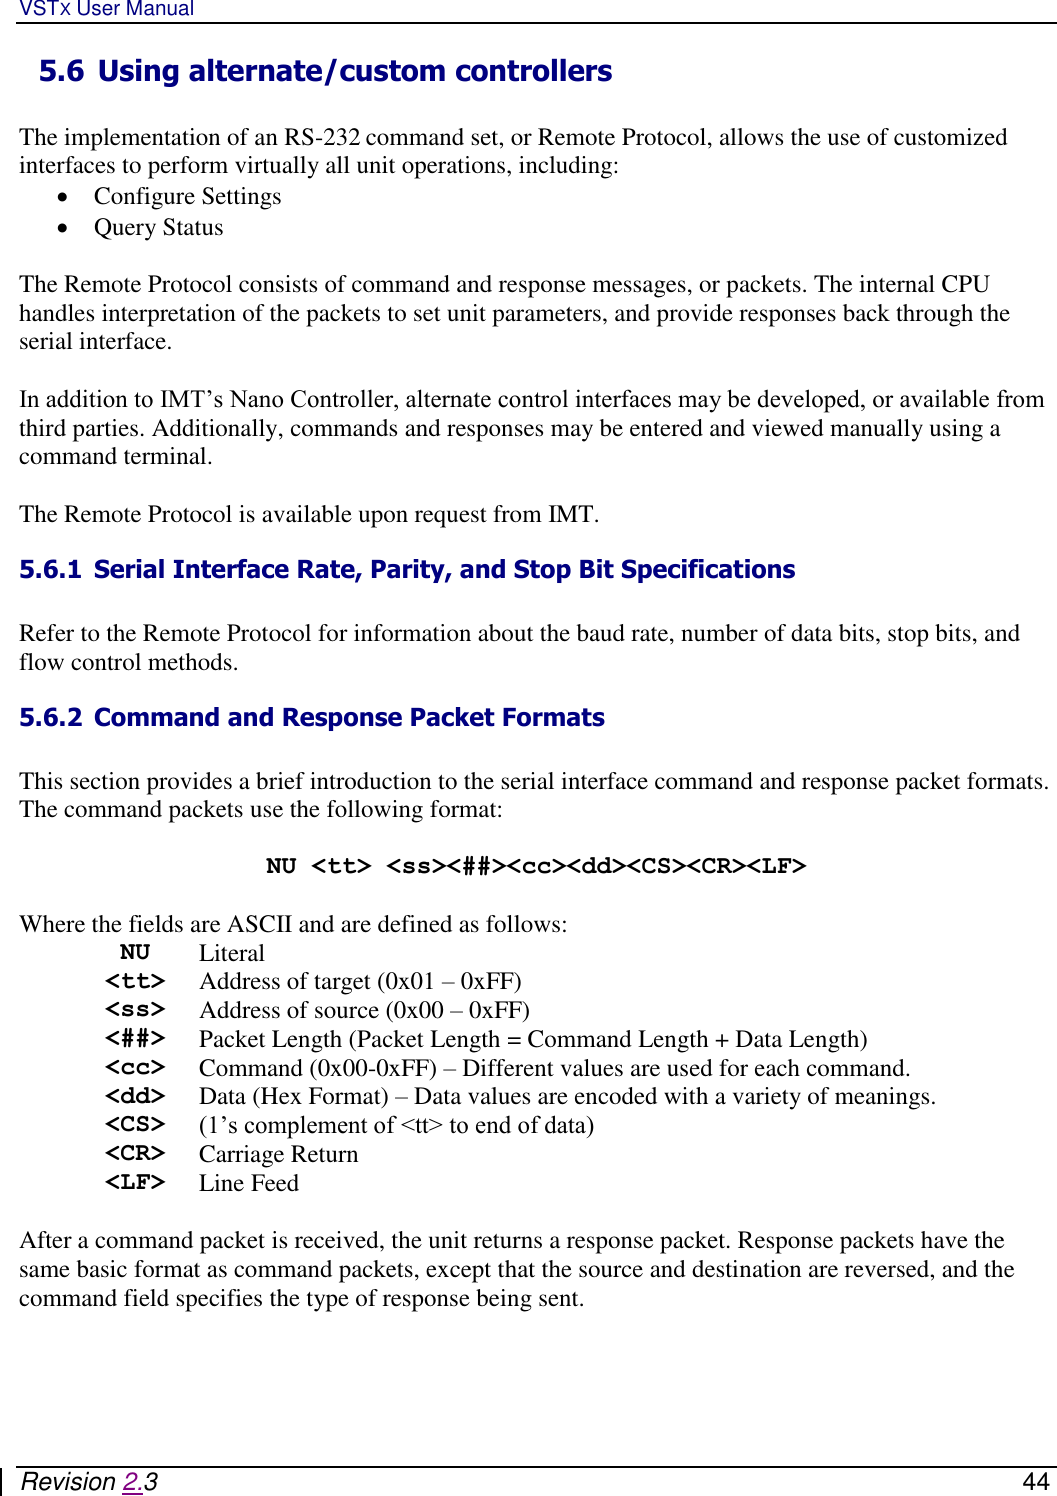 VSTX User Manual   Revision 2.3    44 5.6 Using alternate/custom controllers   The implementation of an RS-232 command set, or Remote Protocol, allows the use of customized interfaces to perform virtually all unit operations, including:    Configure Settings  Query Status  The Remote Protocol consists of command and response messages, or packets. The internal CPU handles interpretation of the packets to set unit parameters, and provide responses back through the serial interface.  In addition to IMT’s Nano Controller, alternate control interfaces may be developed, or available from third parties. Additionally, commands and responses may be entered and viewed manually using a command terminal.    The Remote Protocol is available upon request from IMT. 5.6.1 Serial Interface Rate, Parity, and Stop Bit Specifications  Refer to the Remote Protocol for information about the baud rate, number of data bits, stop bits, and flow control methods.  5.6.2 Command and Response Packet Formats  This section provides a brief introduction to the serial interface command and response packet formats.  The command packets use the following format:  NU &lt;tt&gt; &lt;ss&gt;&lt;##&gt;&lt;cc&gt;&lt;dd&gt;&lt;CS&gt;&lt;CR&gt;&lt;LF&gt;  Where the fields are ASCII and are defined as follows:  NU Literal &lt;tt&gt; Address of target (0x01 – 0xFF) &lt;ss&gt; Address of source (0x00 – 0xFF) &lt;##&gt; Packet Length (Packet Length = Command Length + Data Length) &lt;cc&gt; Command (0x00-0xFF) – Different values are used for each command. &lt;dd&gt; Data (Hex Format) – Data values are encoded with a variety of meanings. &lt;CS&gt; (1’s complement of &lt;tt&gt; to end of data) &lt;CR&gt; Carriage Return &lt;LF&gt; Line Feed  After a command packet is received, the unit returns a response packet. Response packets have the same basic format as command packets, except that the source and destination are reversed, and the command field specifies the type of response being sent.   